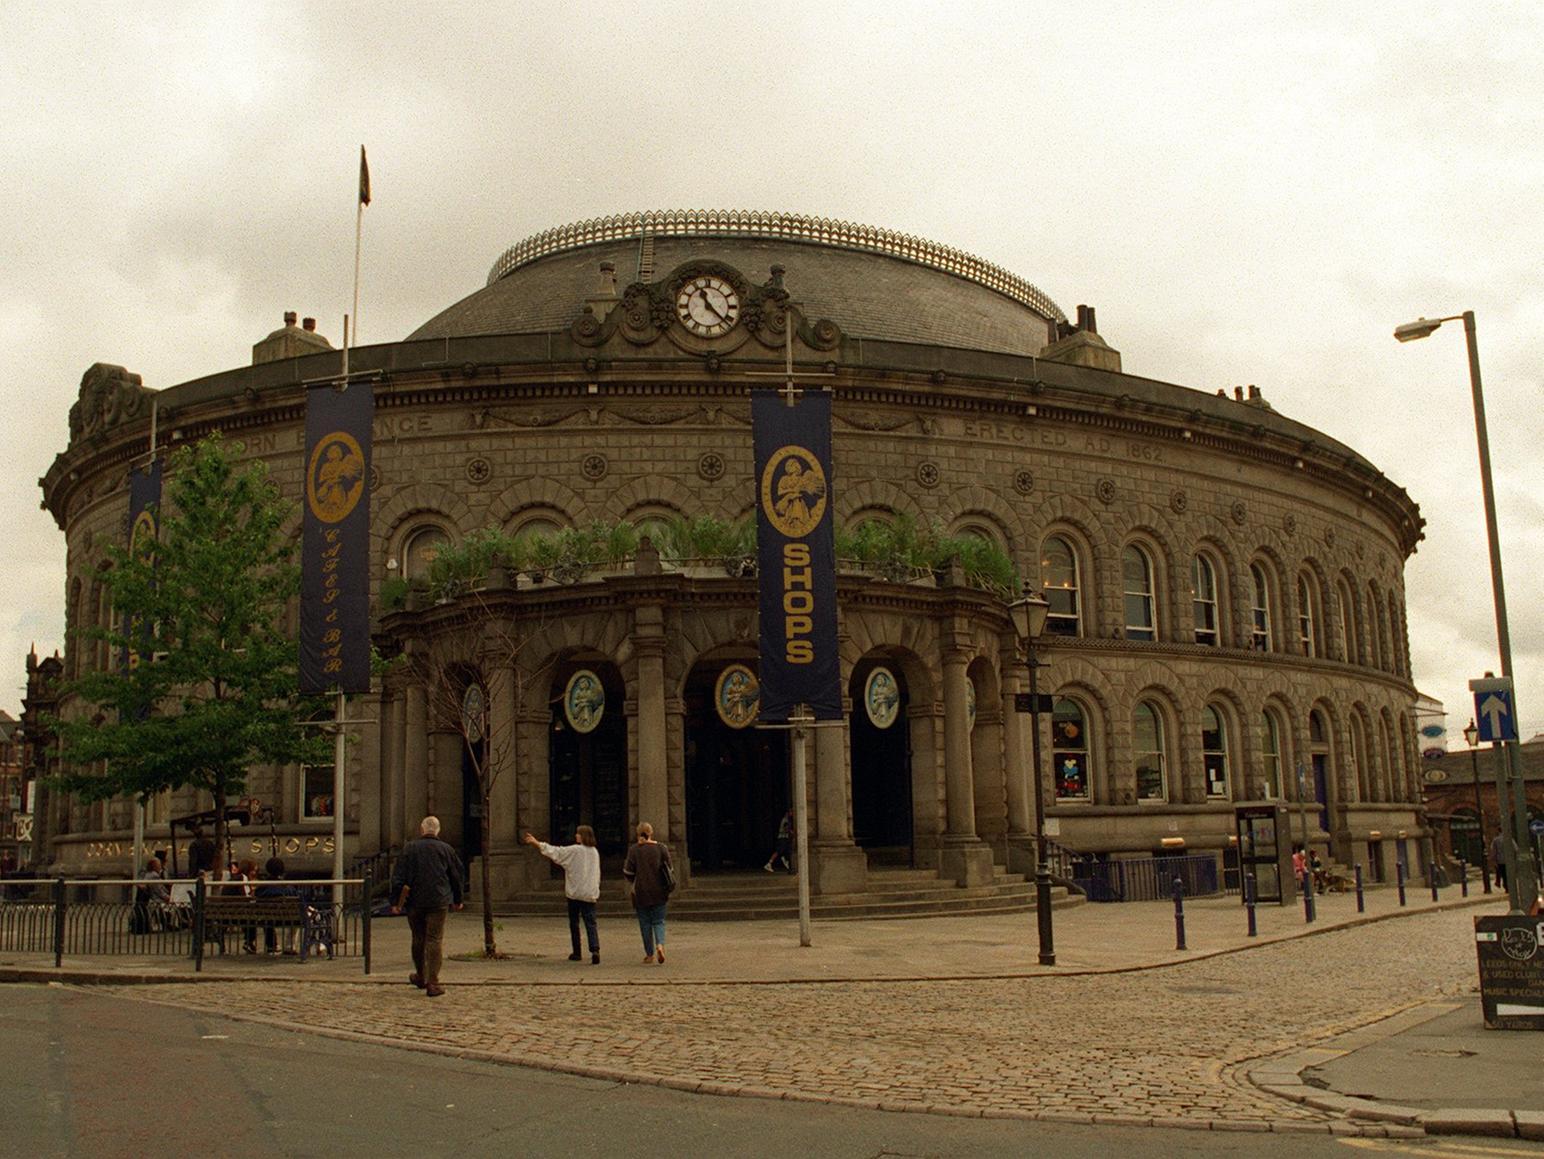 Were you a regular at the Corn Exchange during the 1990s?